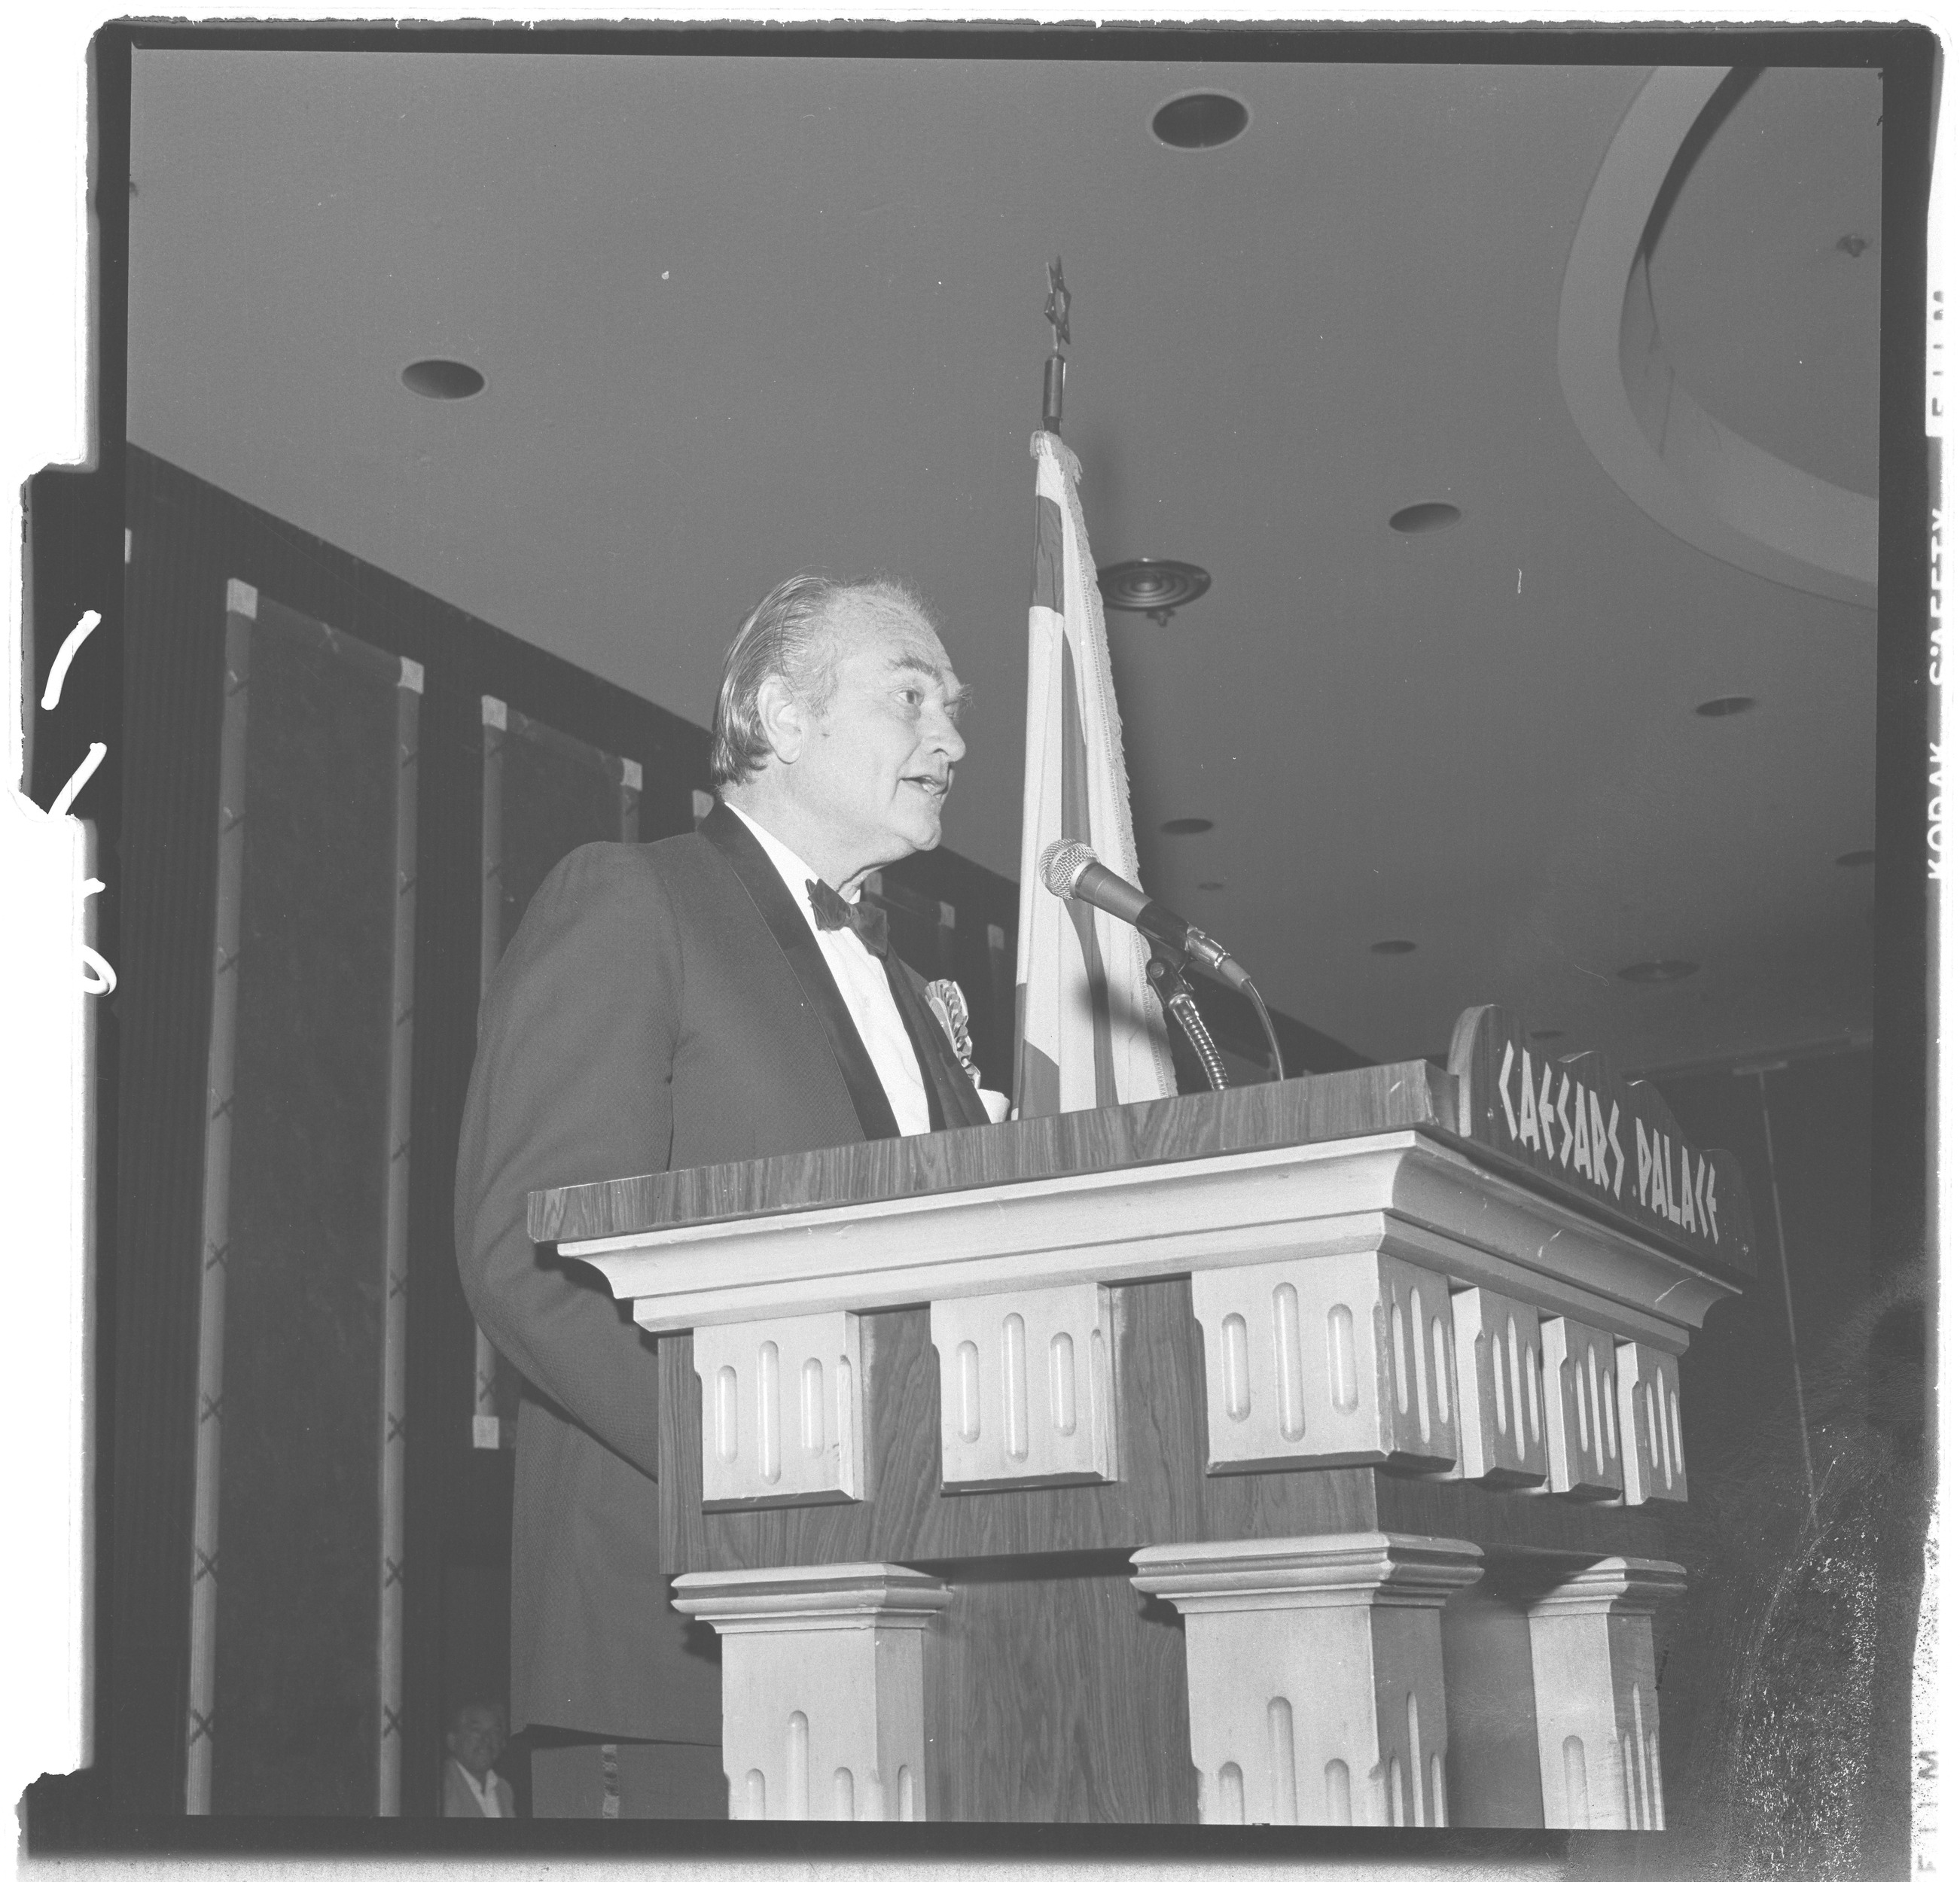 Photographs of Combined Jewish Appeal (Cocktail Party at Caesars Palace, Red Skelton), image 22